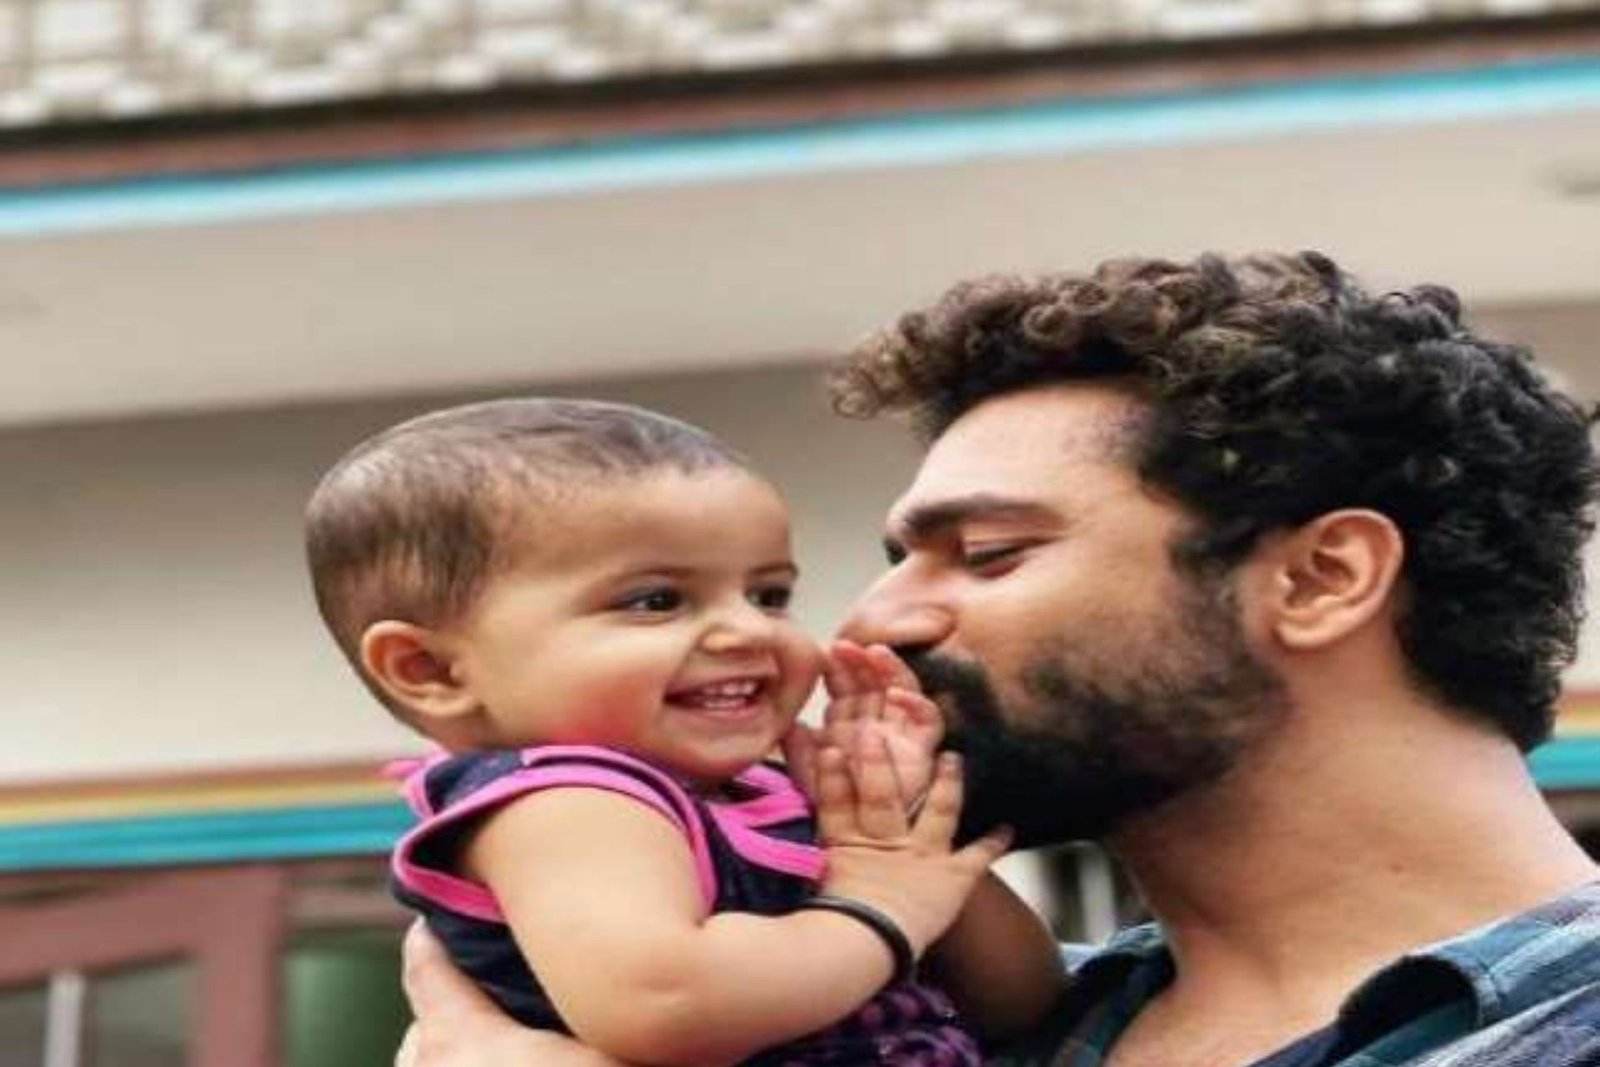 A photo of His Niece, Vicky Kaushal Is Too Amazing For Words